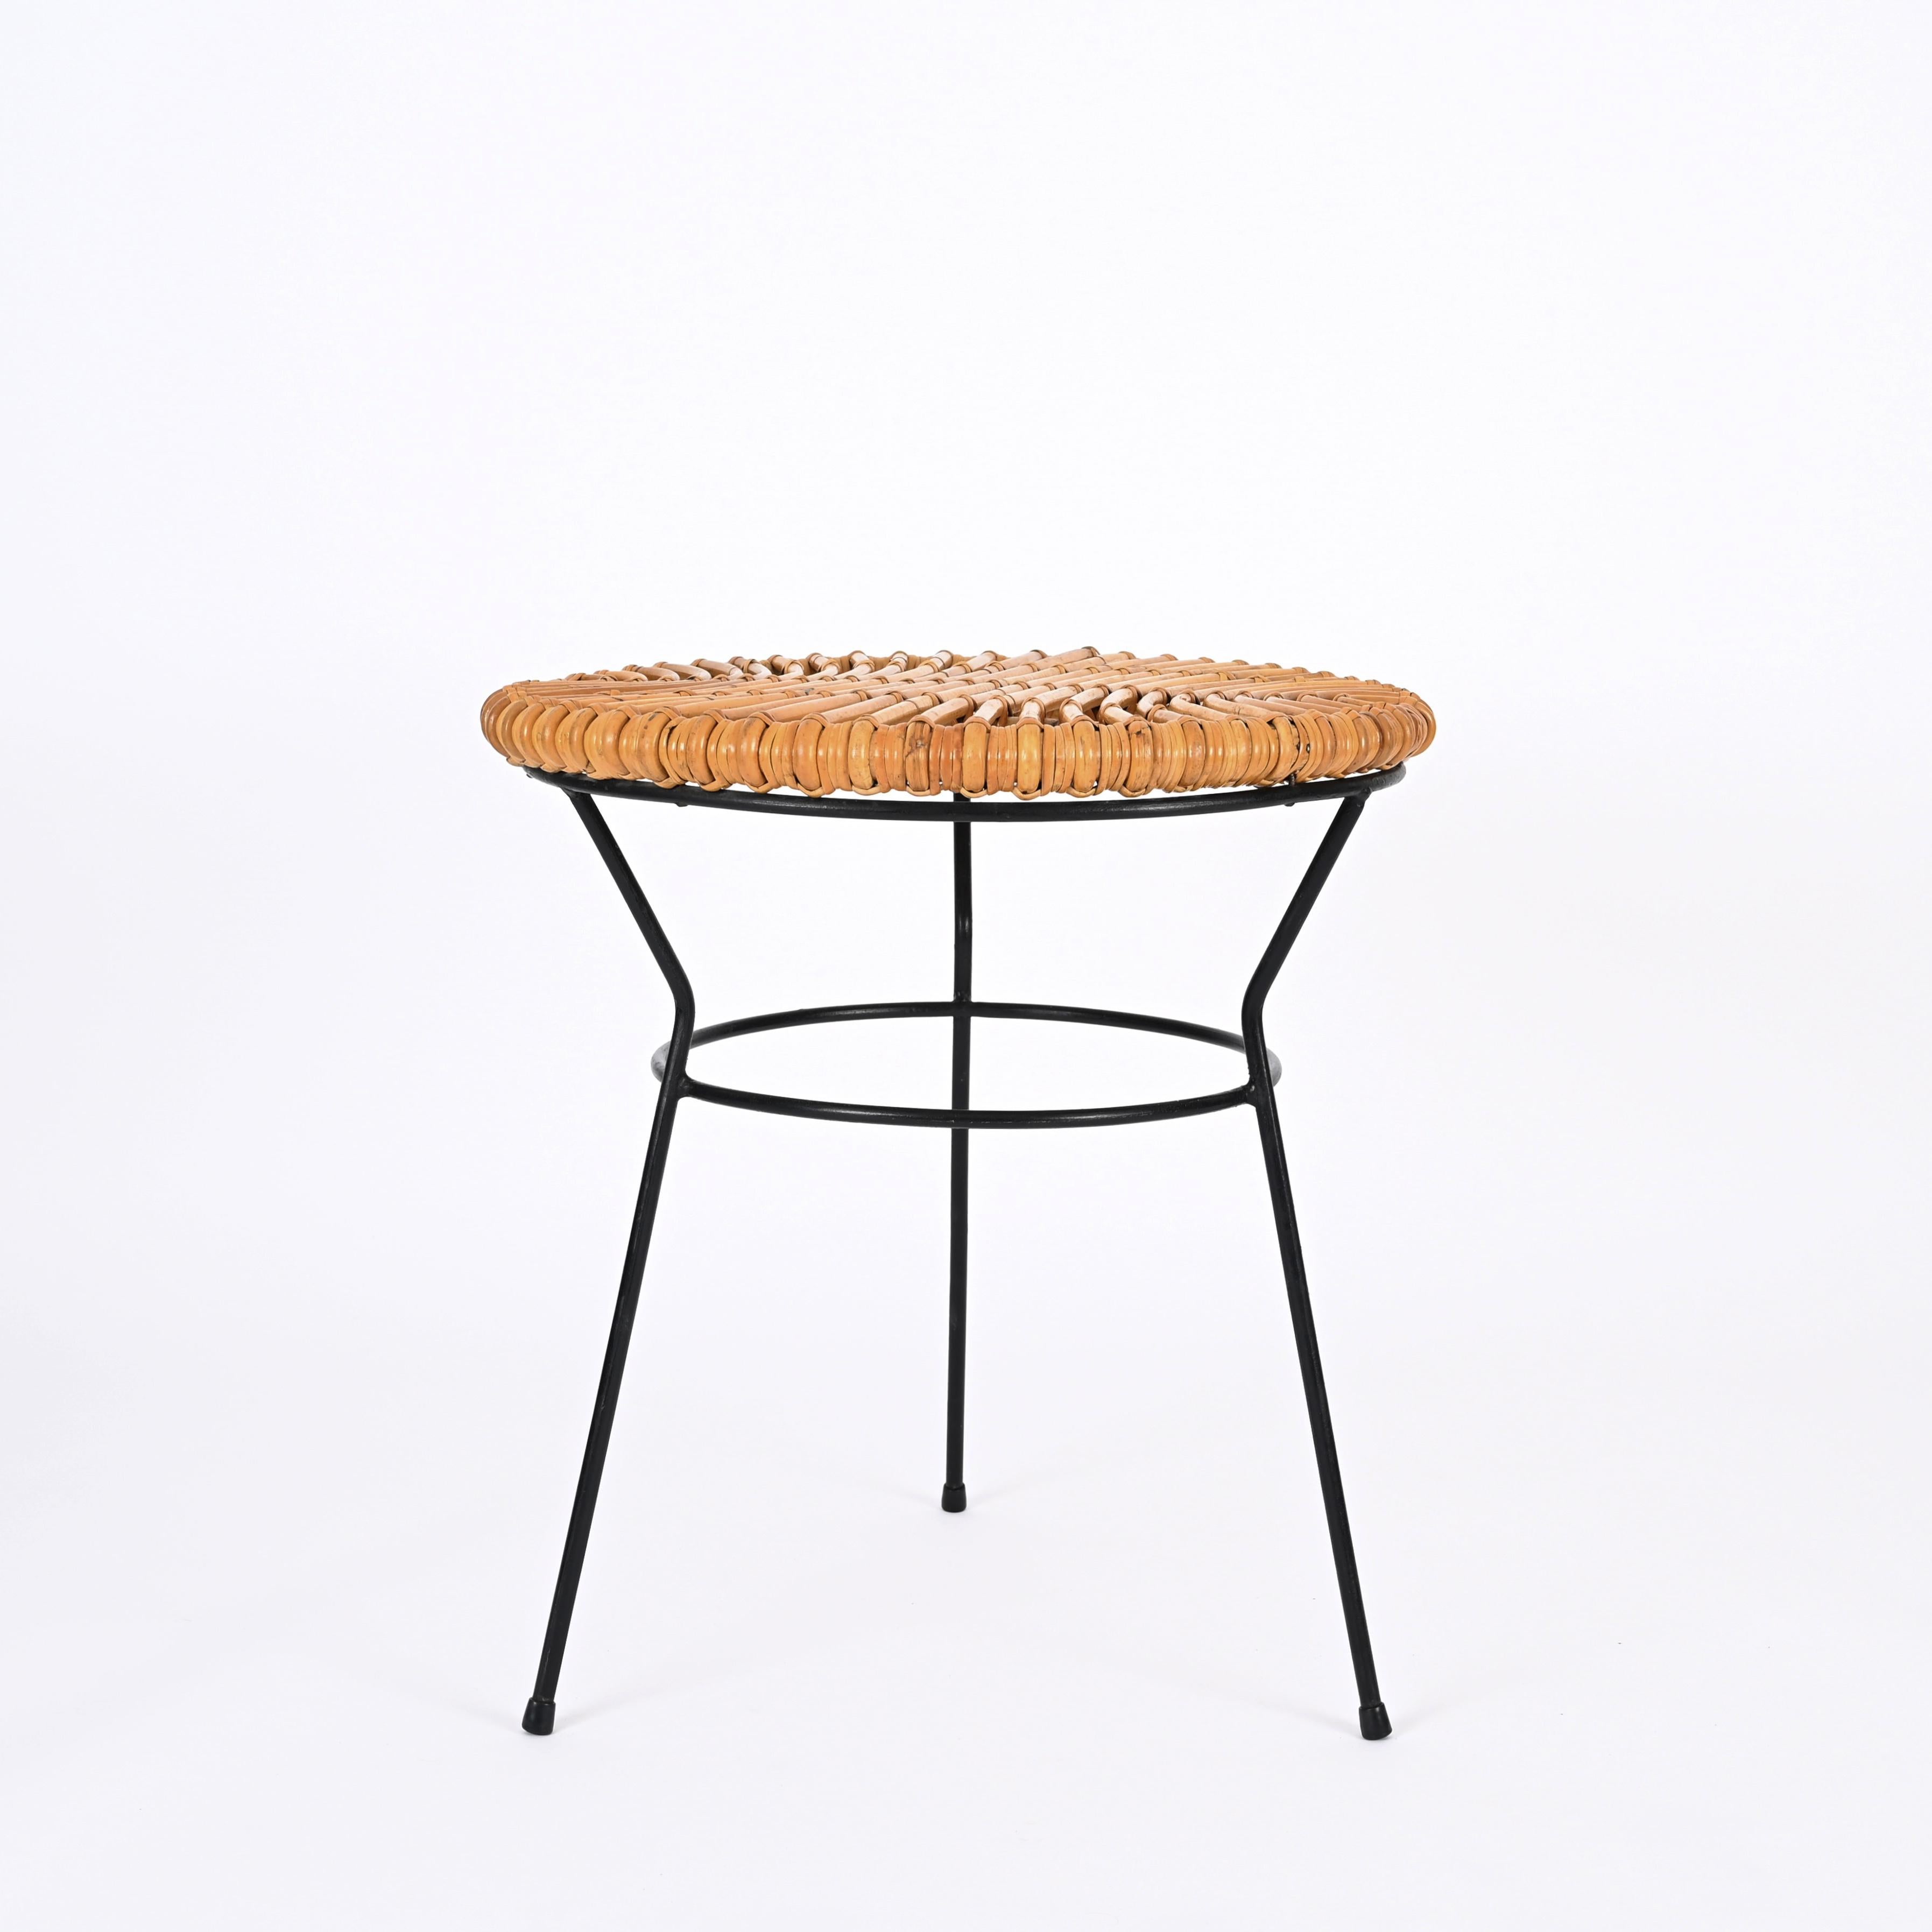 Italian French Riviera Rattan, Wicker and Iron Coffee Table, Roberto Mango, Italy 1960s For Sale